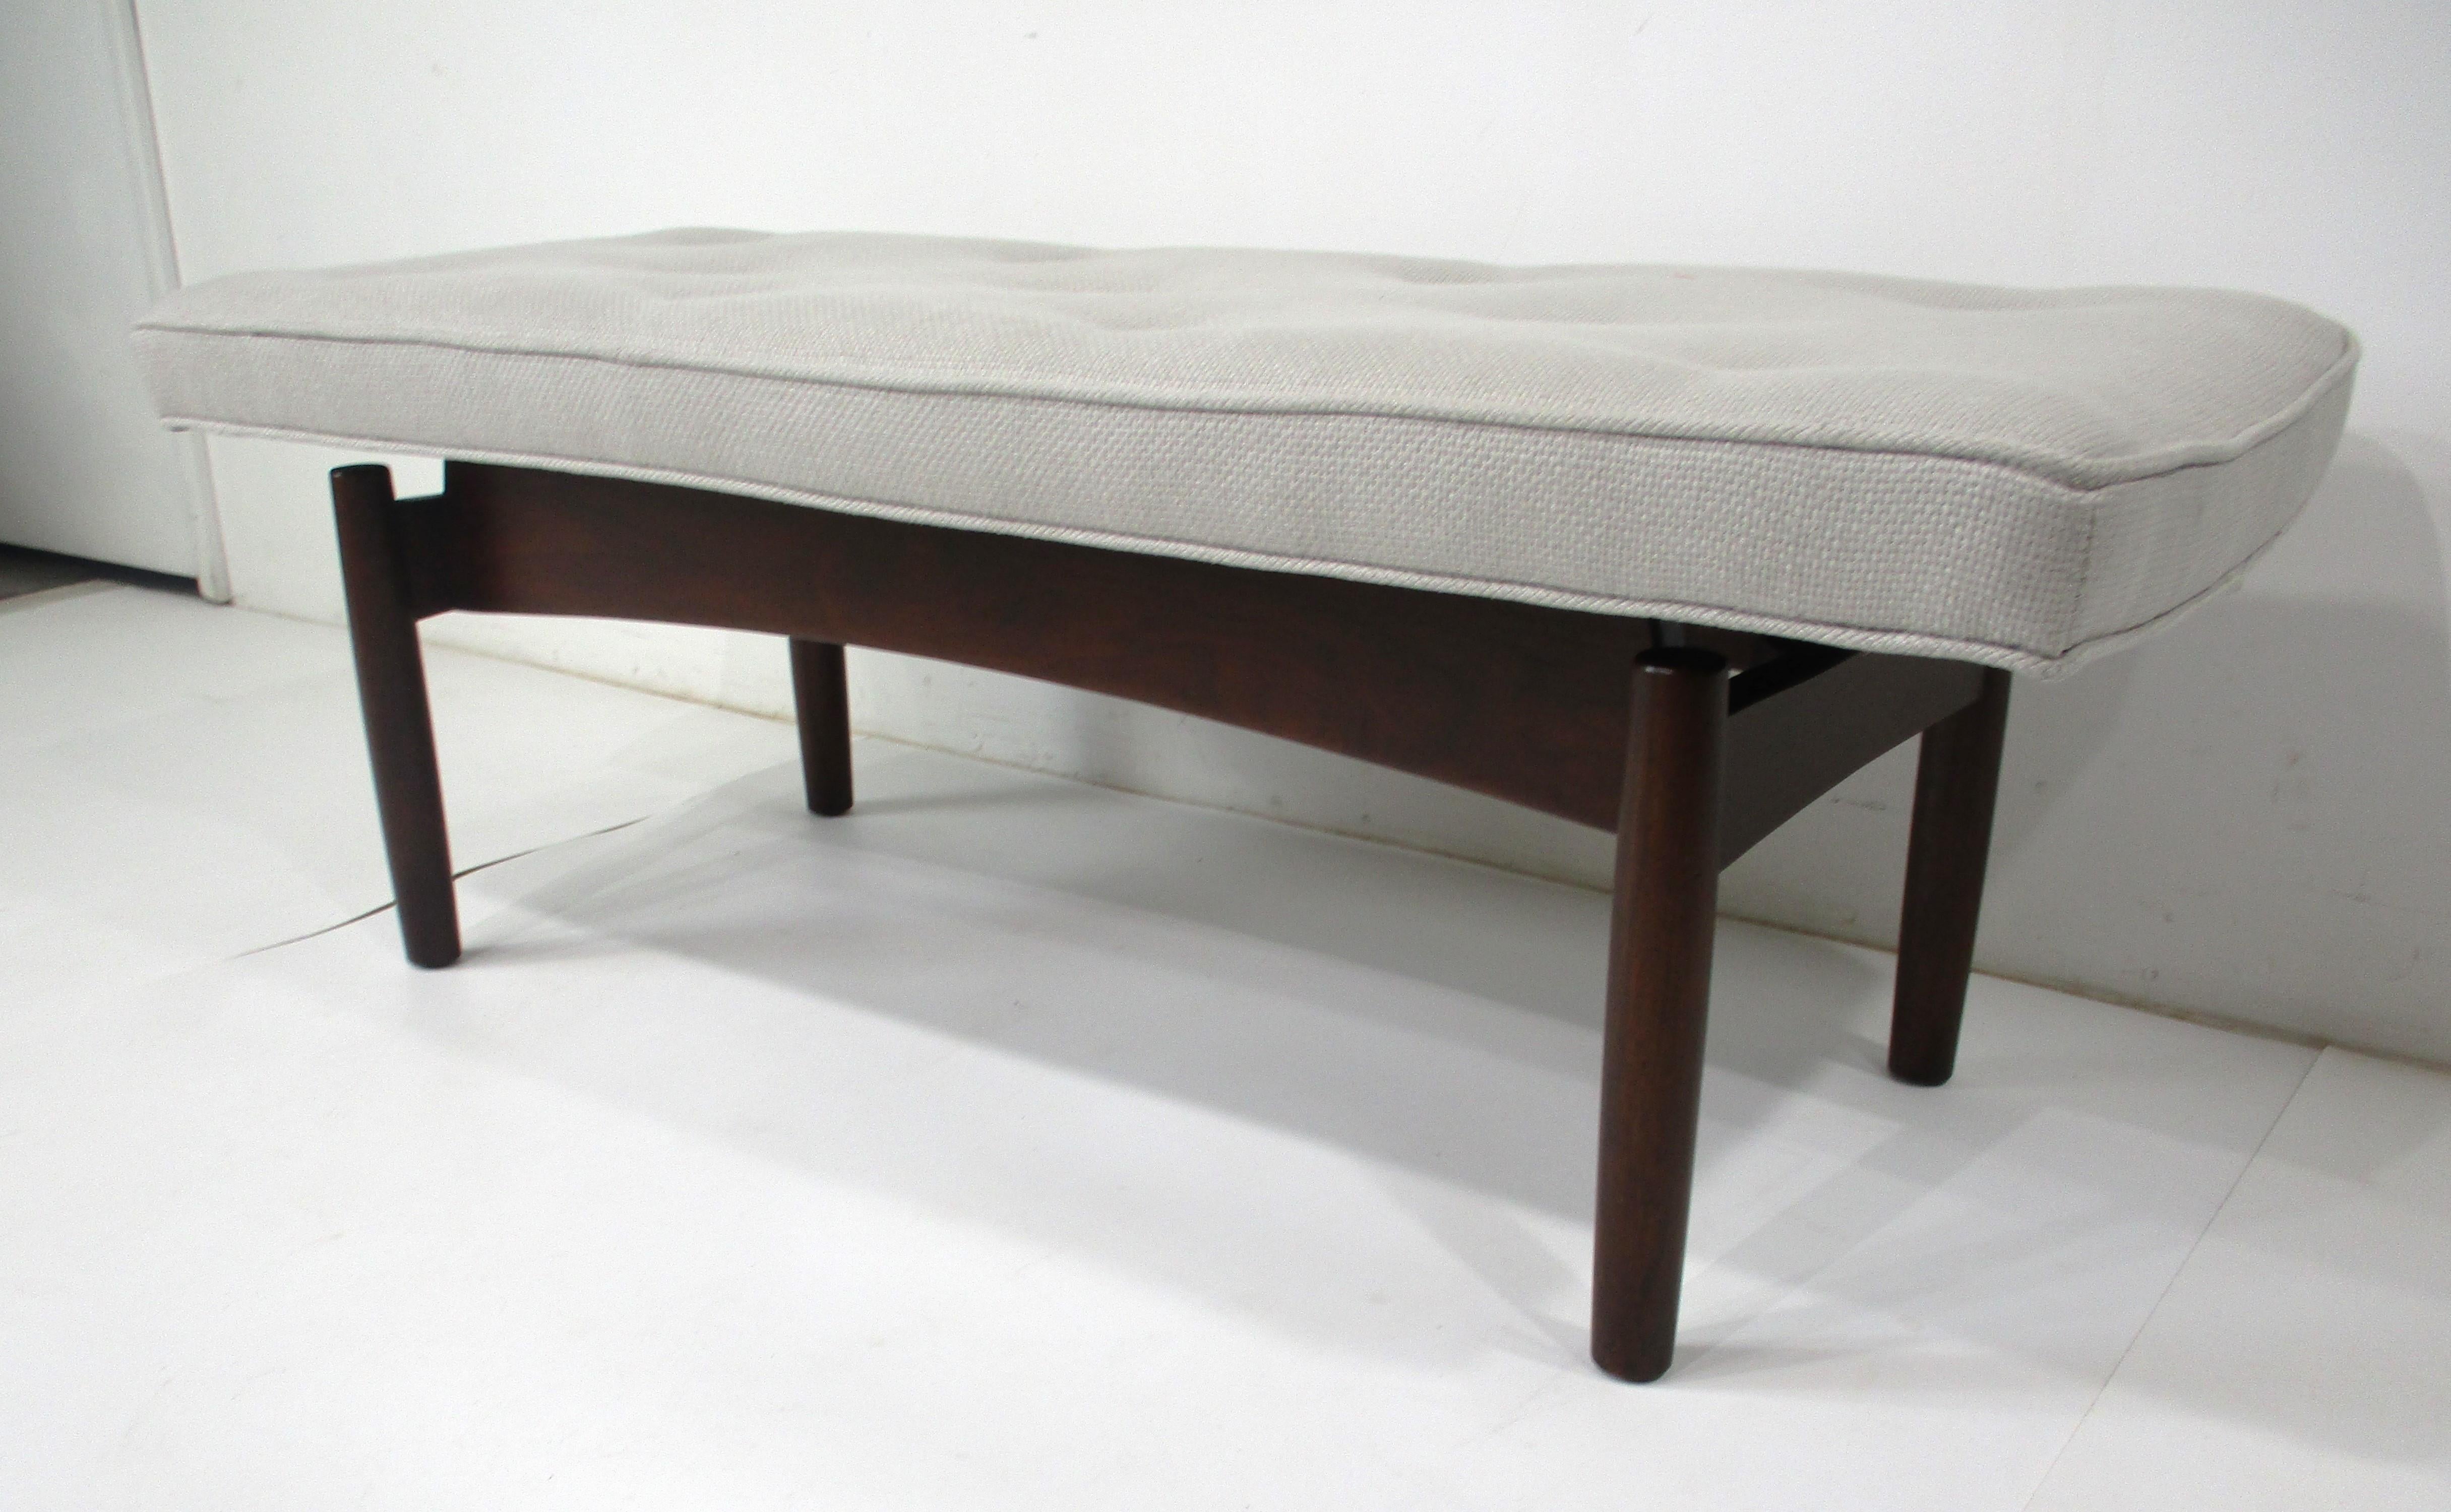 Unknown Upholstered Walnut Bench in the Style of Greta Grossman Danish Modern (A) For Sale